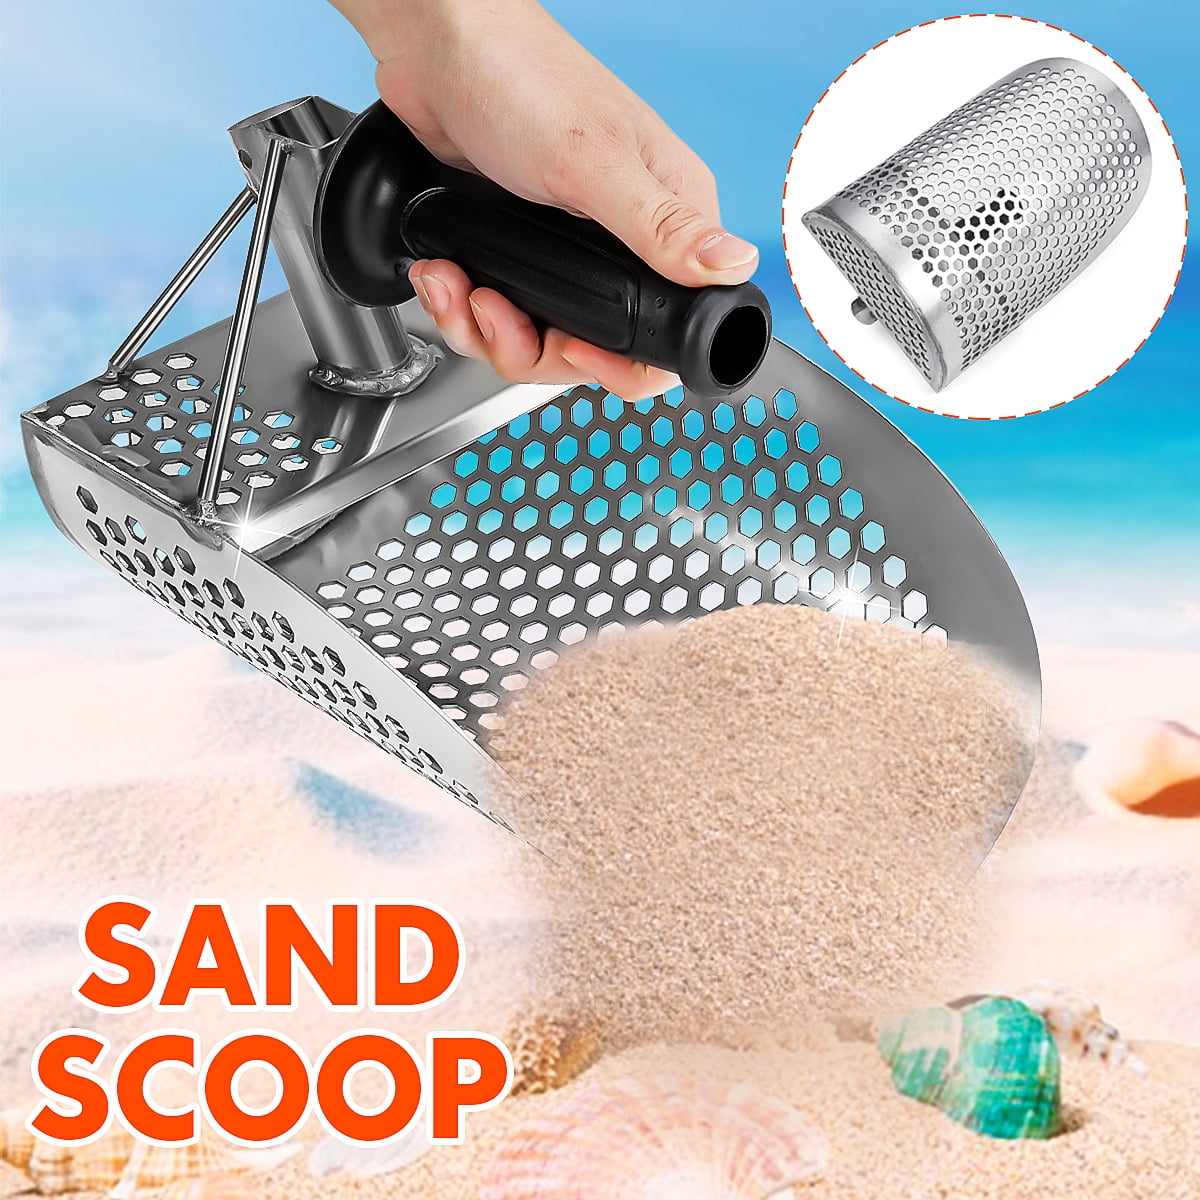 Sand Scoop for Metal Detecting Stainless Detector for Beach Treasure Hunting US 